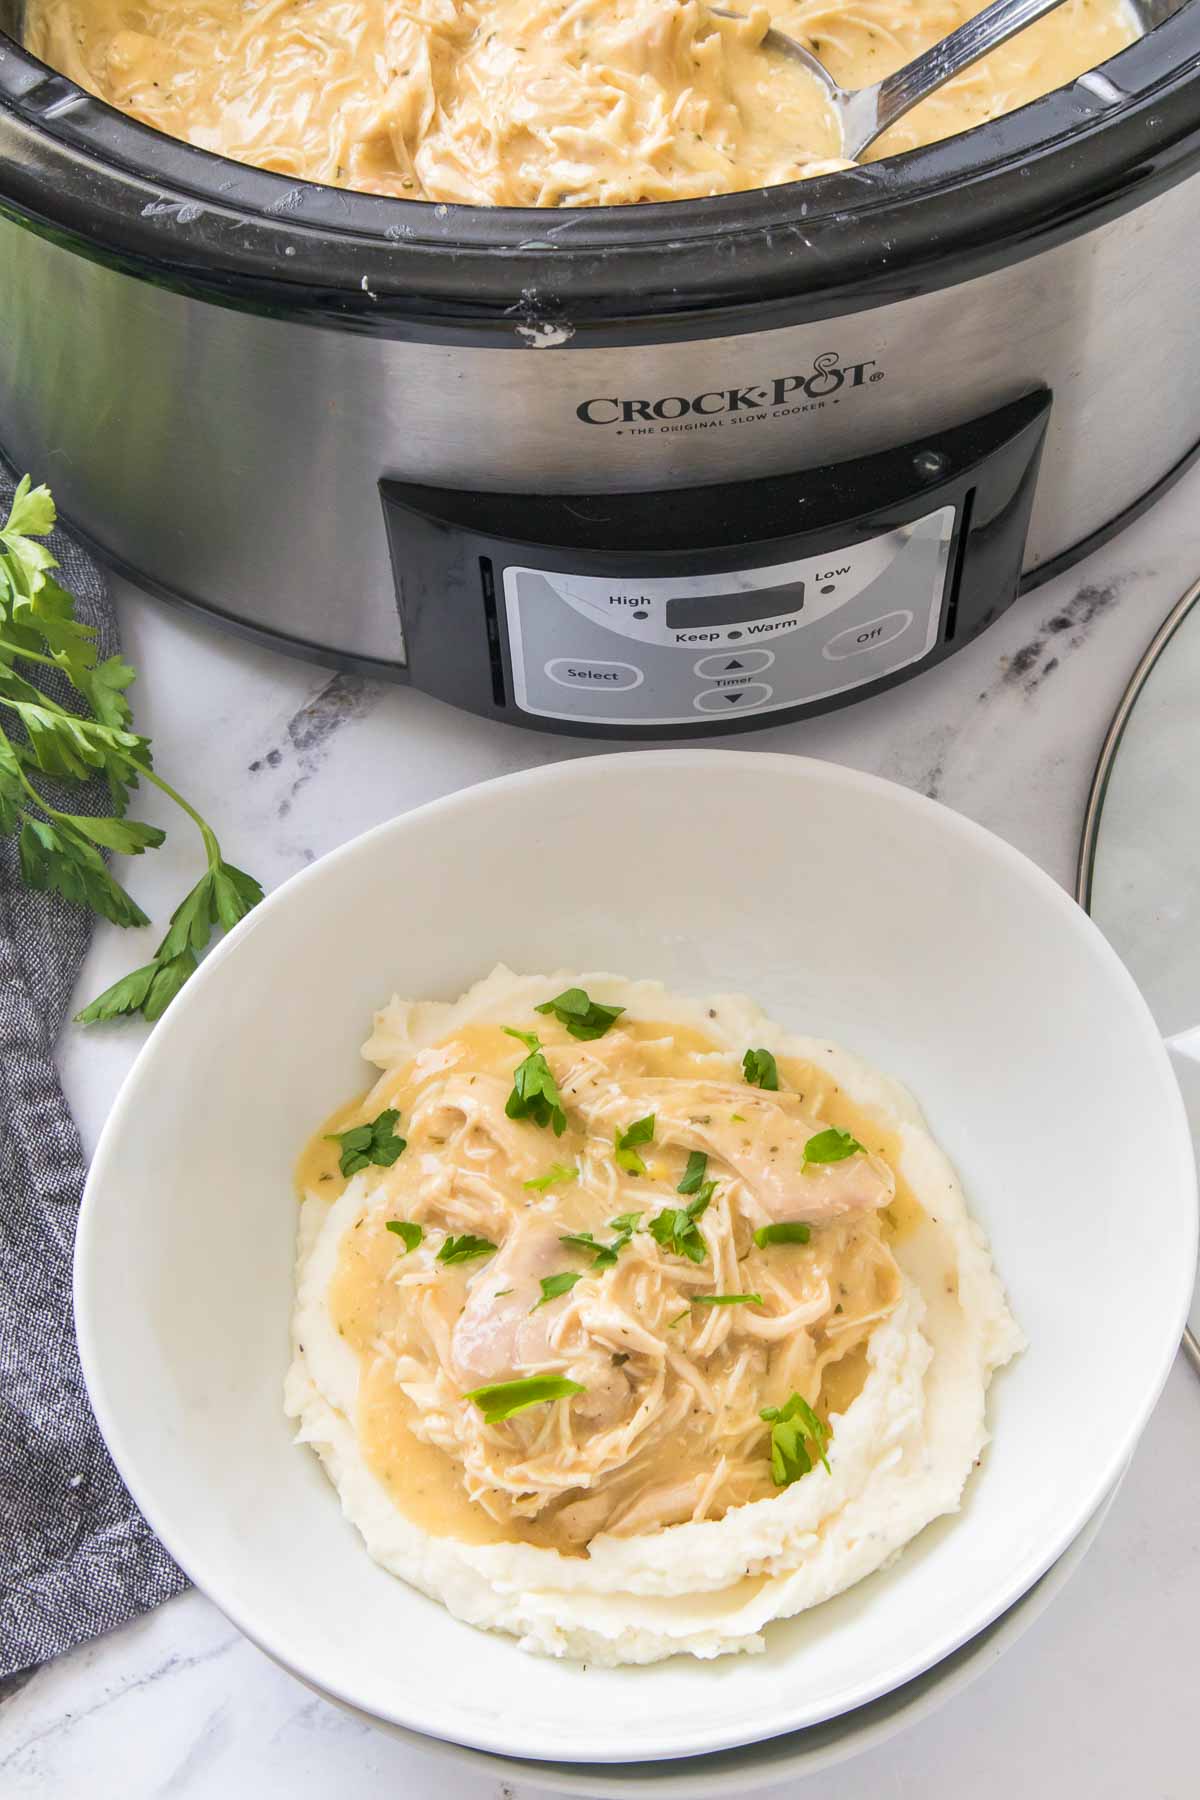 Chicken and gravy over mashed potatoes next to a slow cooker